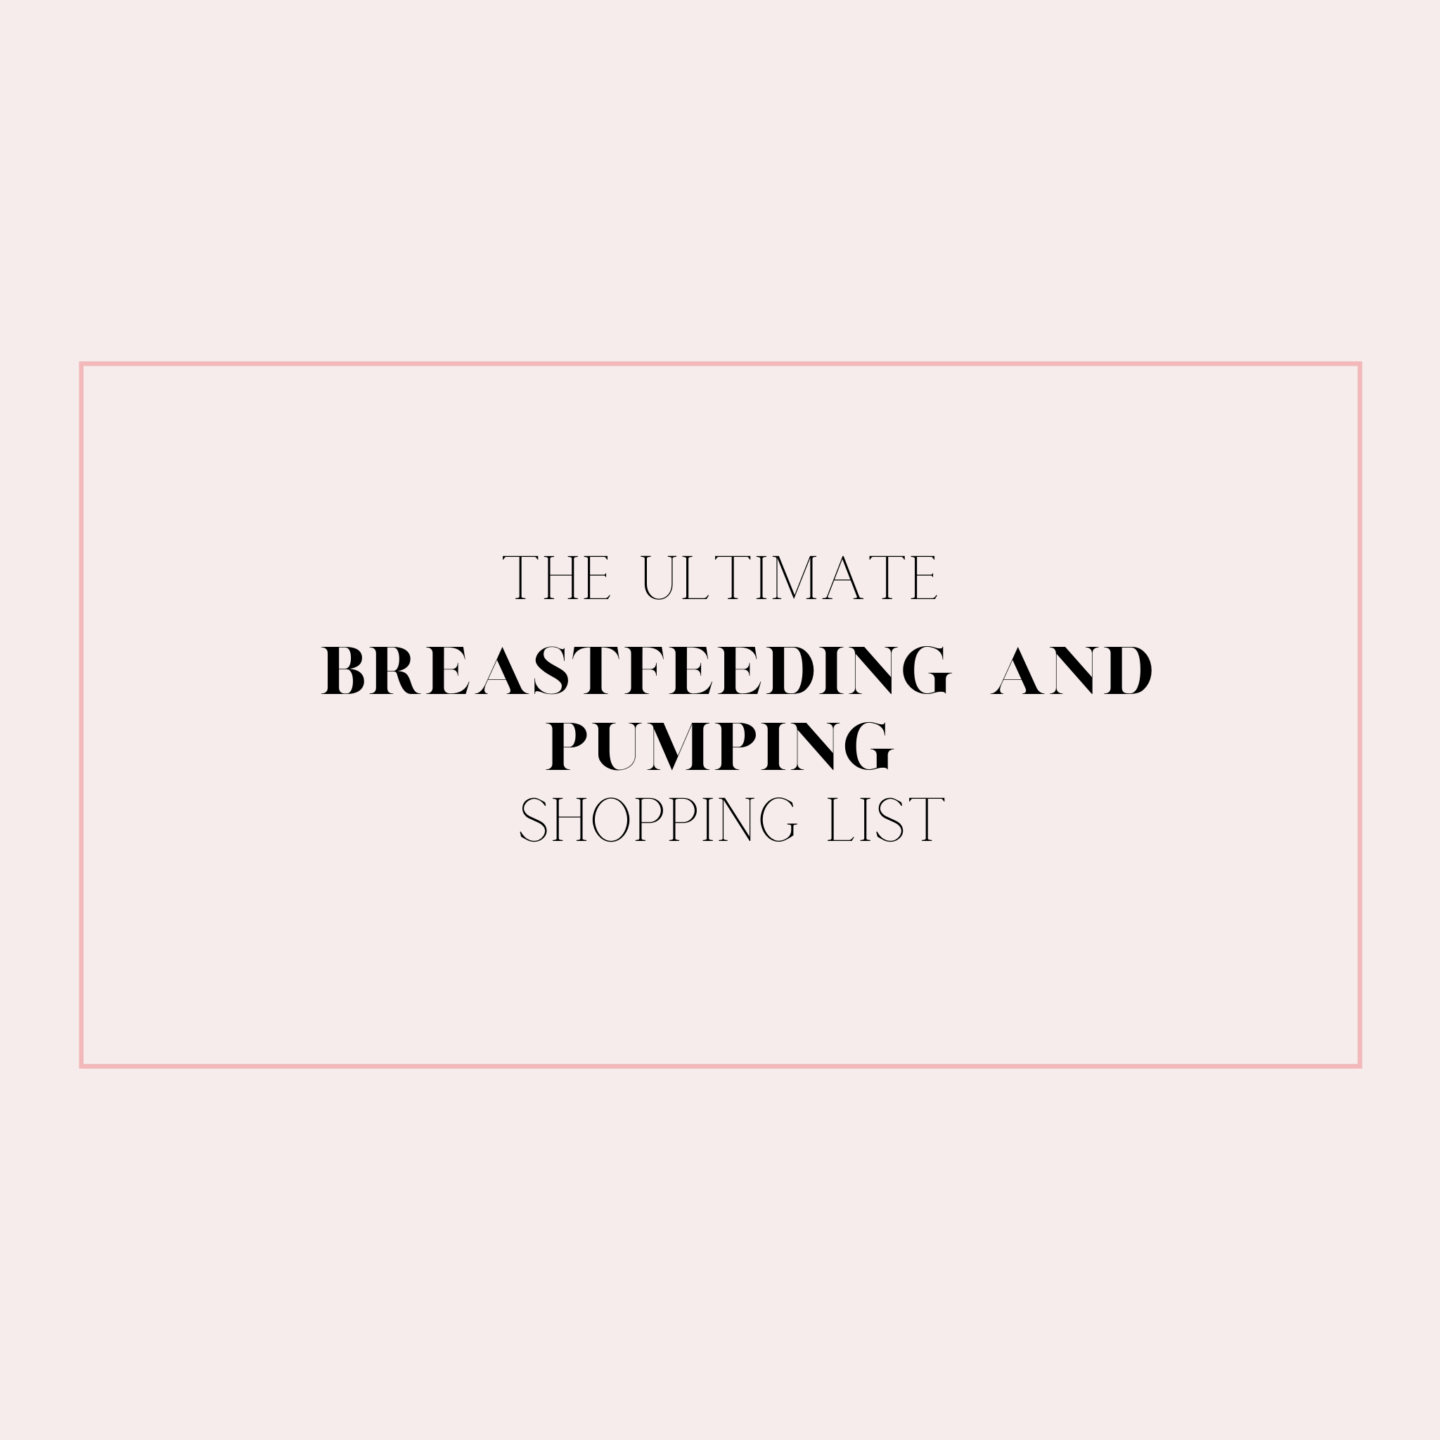 The Ultimate Breastfeeding and Pumping Shopping List